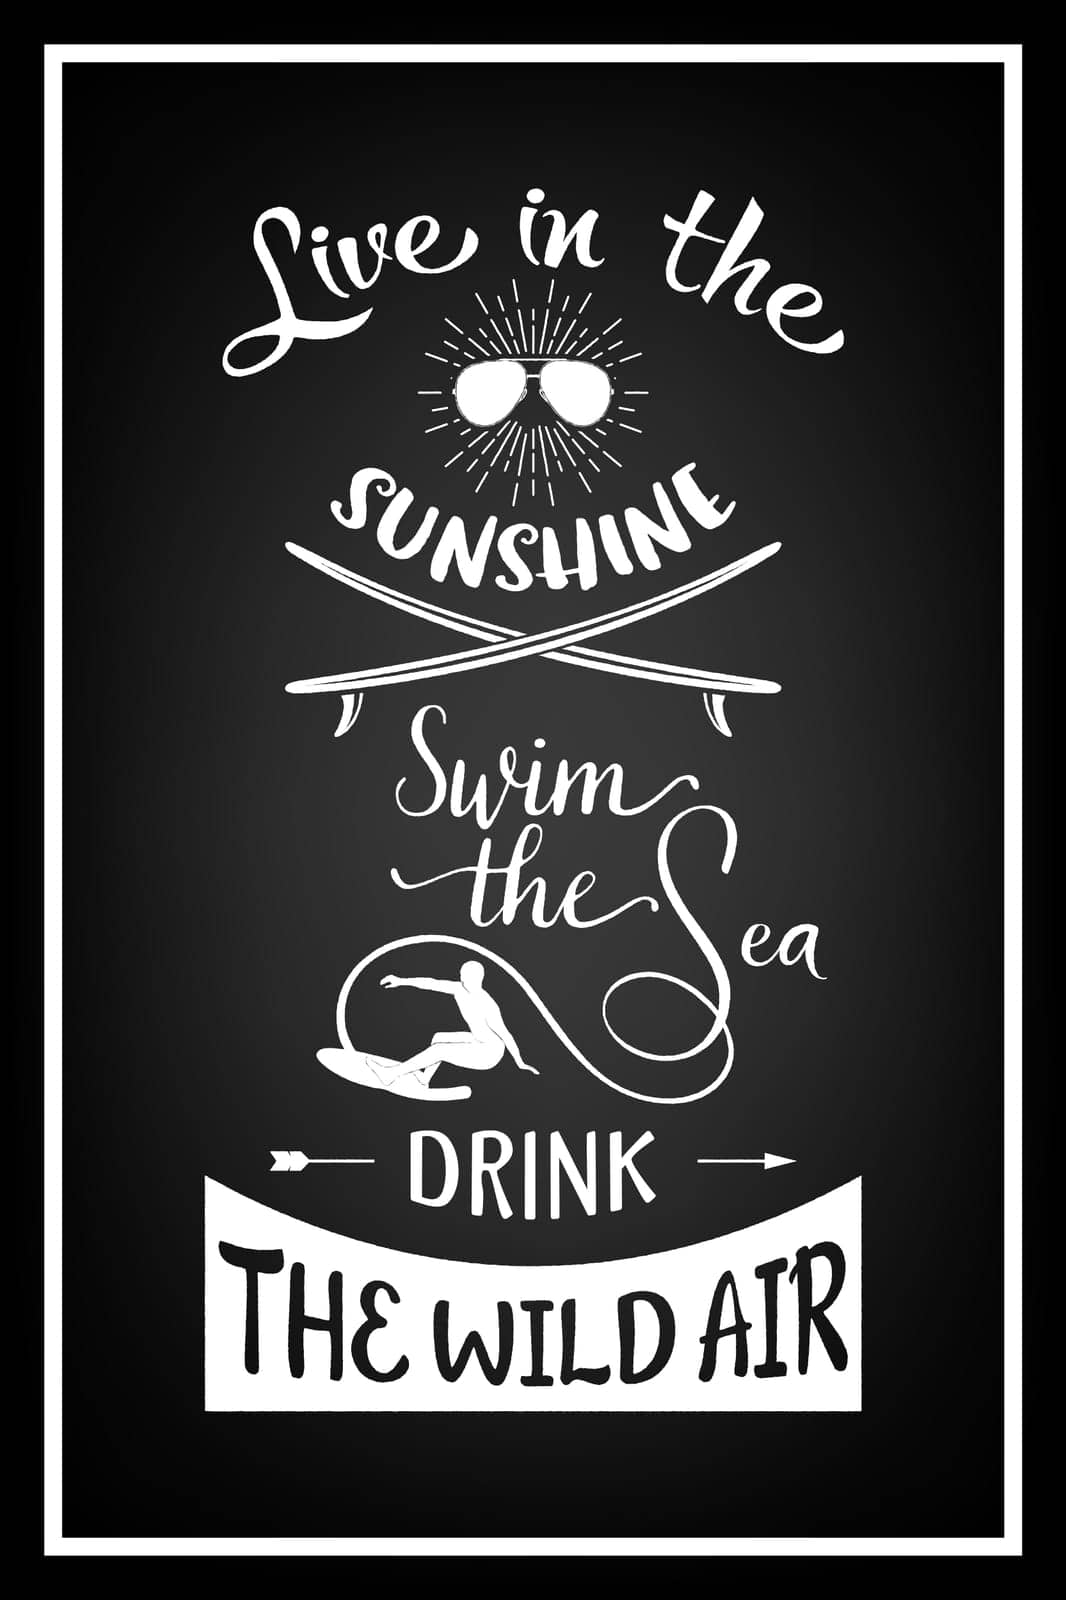 Live in the sunshine swim the sea drink the wild air - Quote Typographical Background. Vector EPS8 illustration.